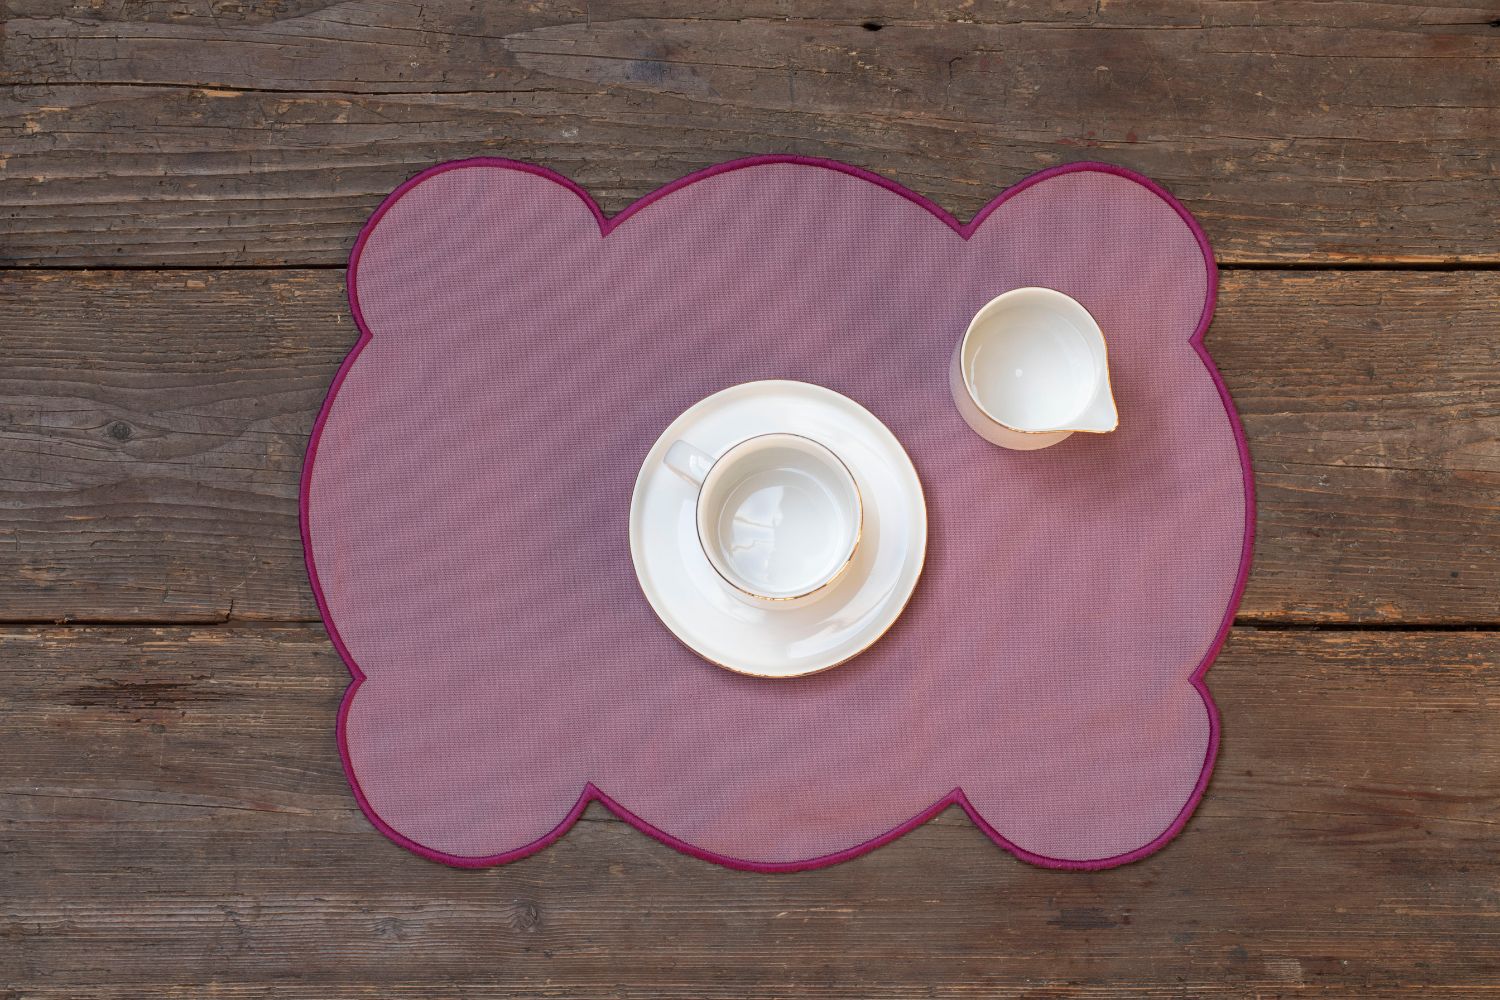 NIKE - shaped placemat with matching scalloped embroidered edge, in canvas cotton plain or printed (2 pieces)